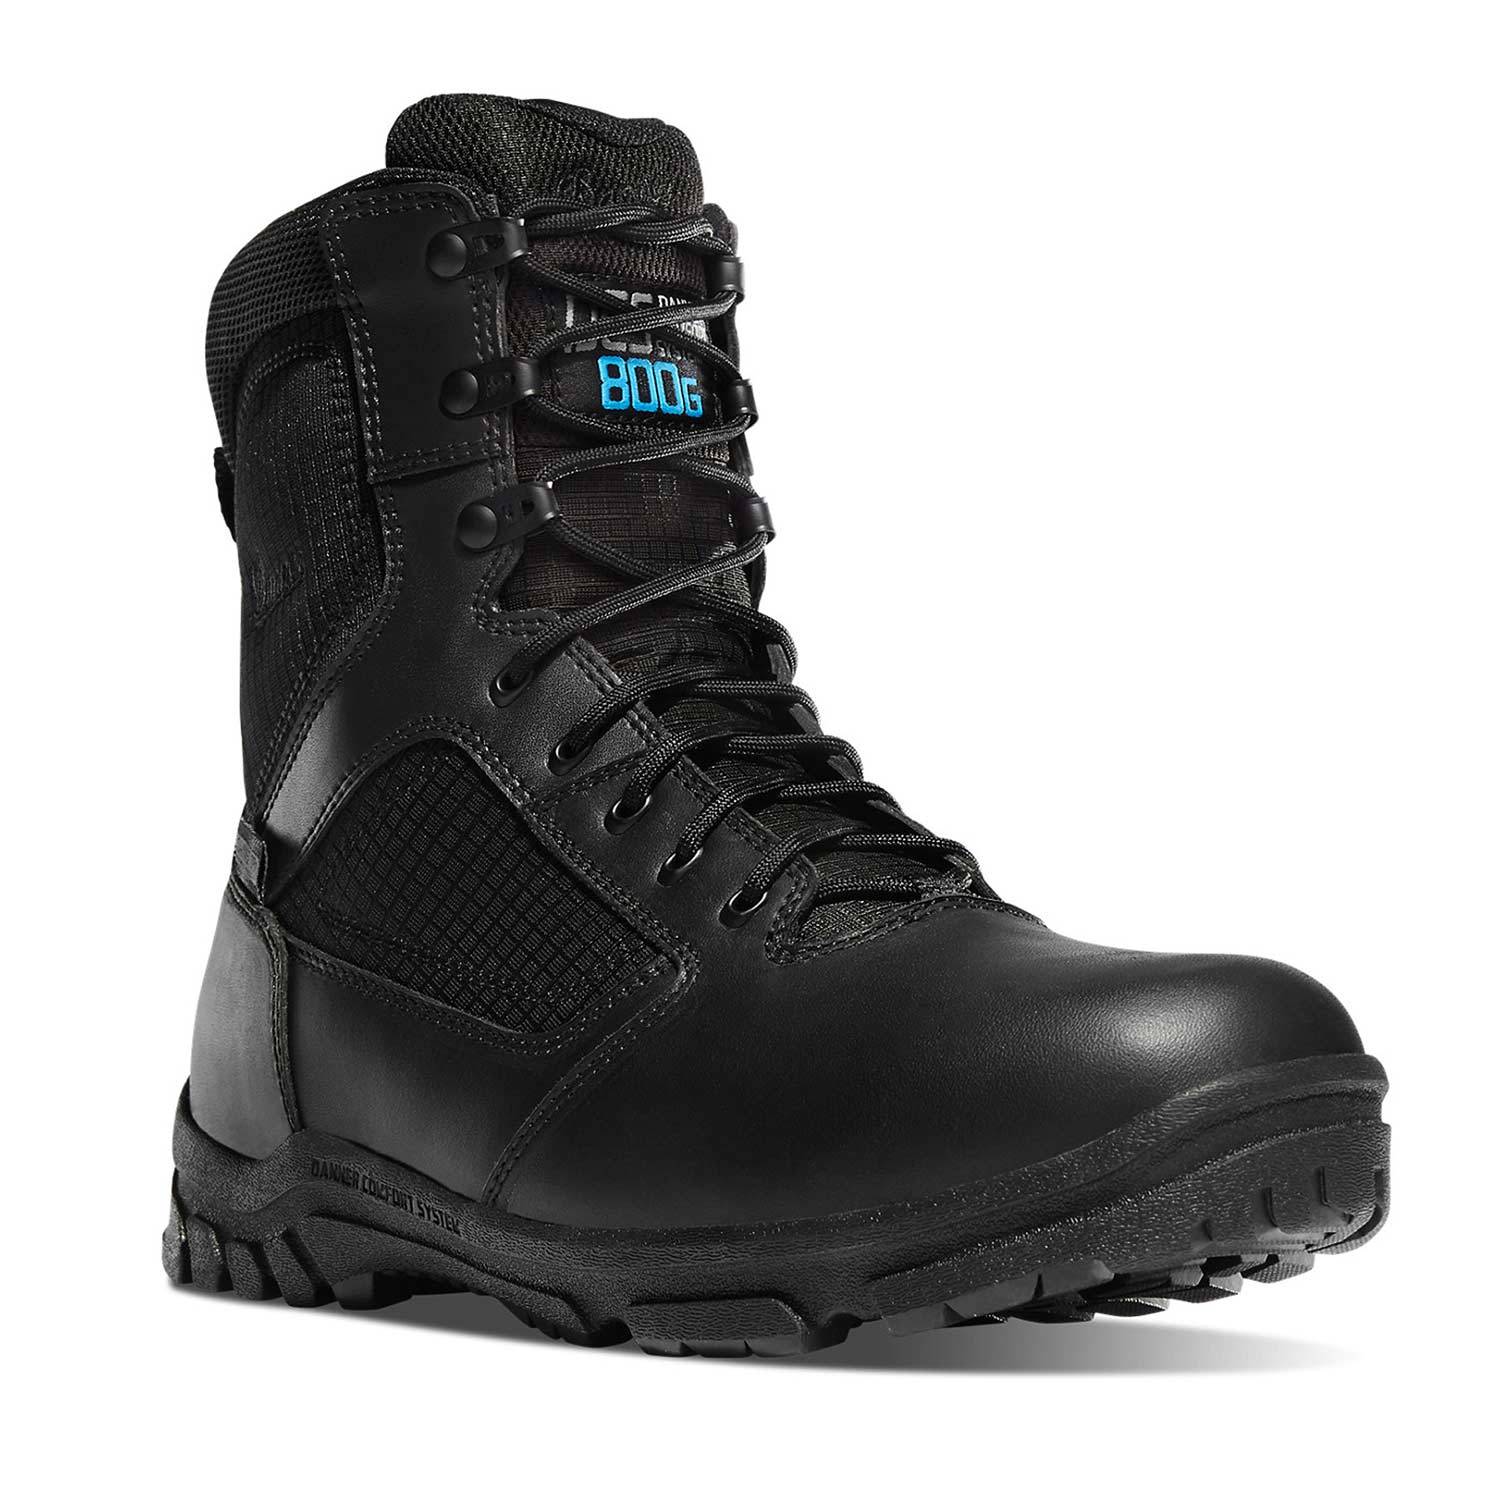 Danner Lookout 8" Insulated 800G